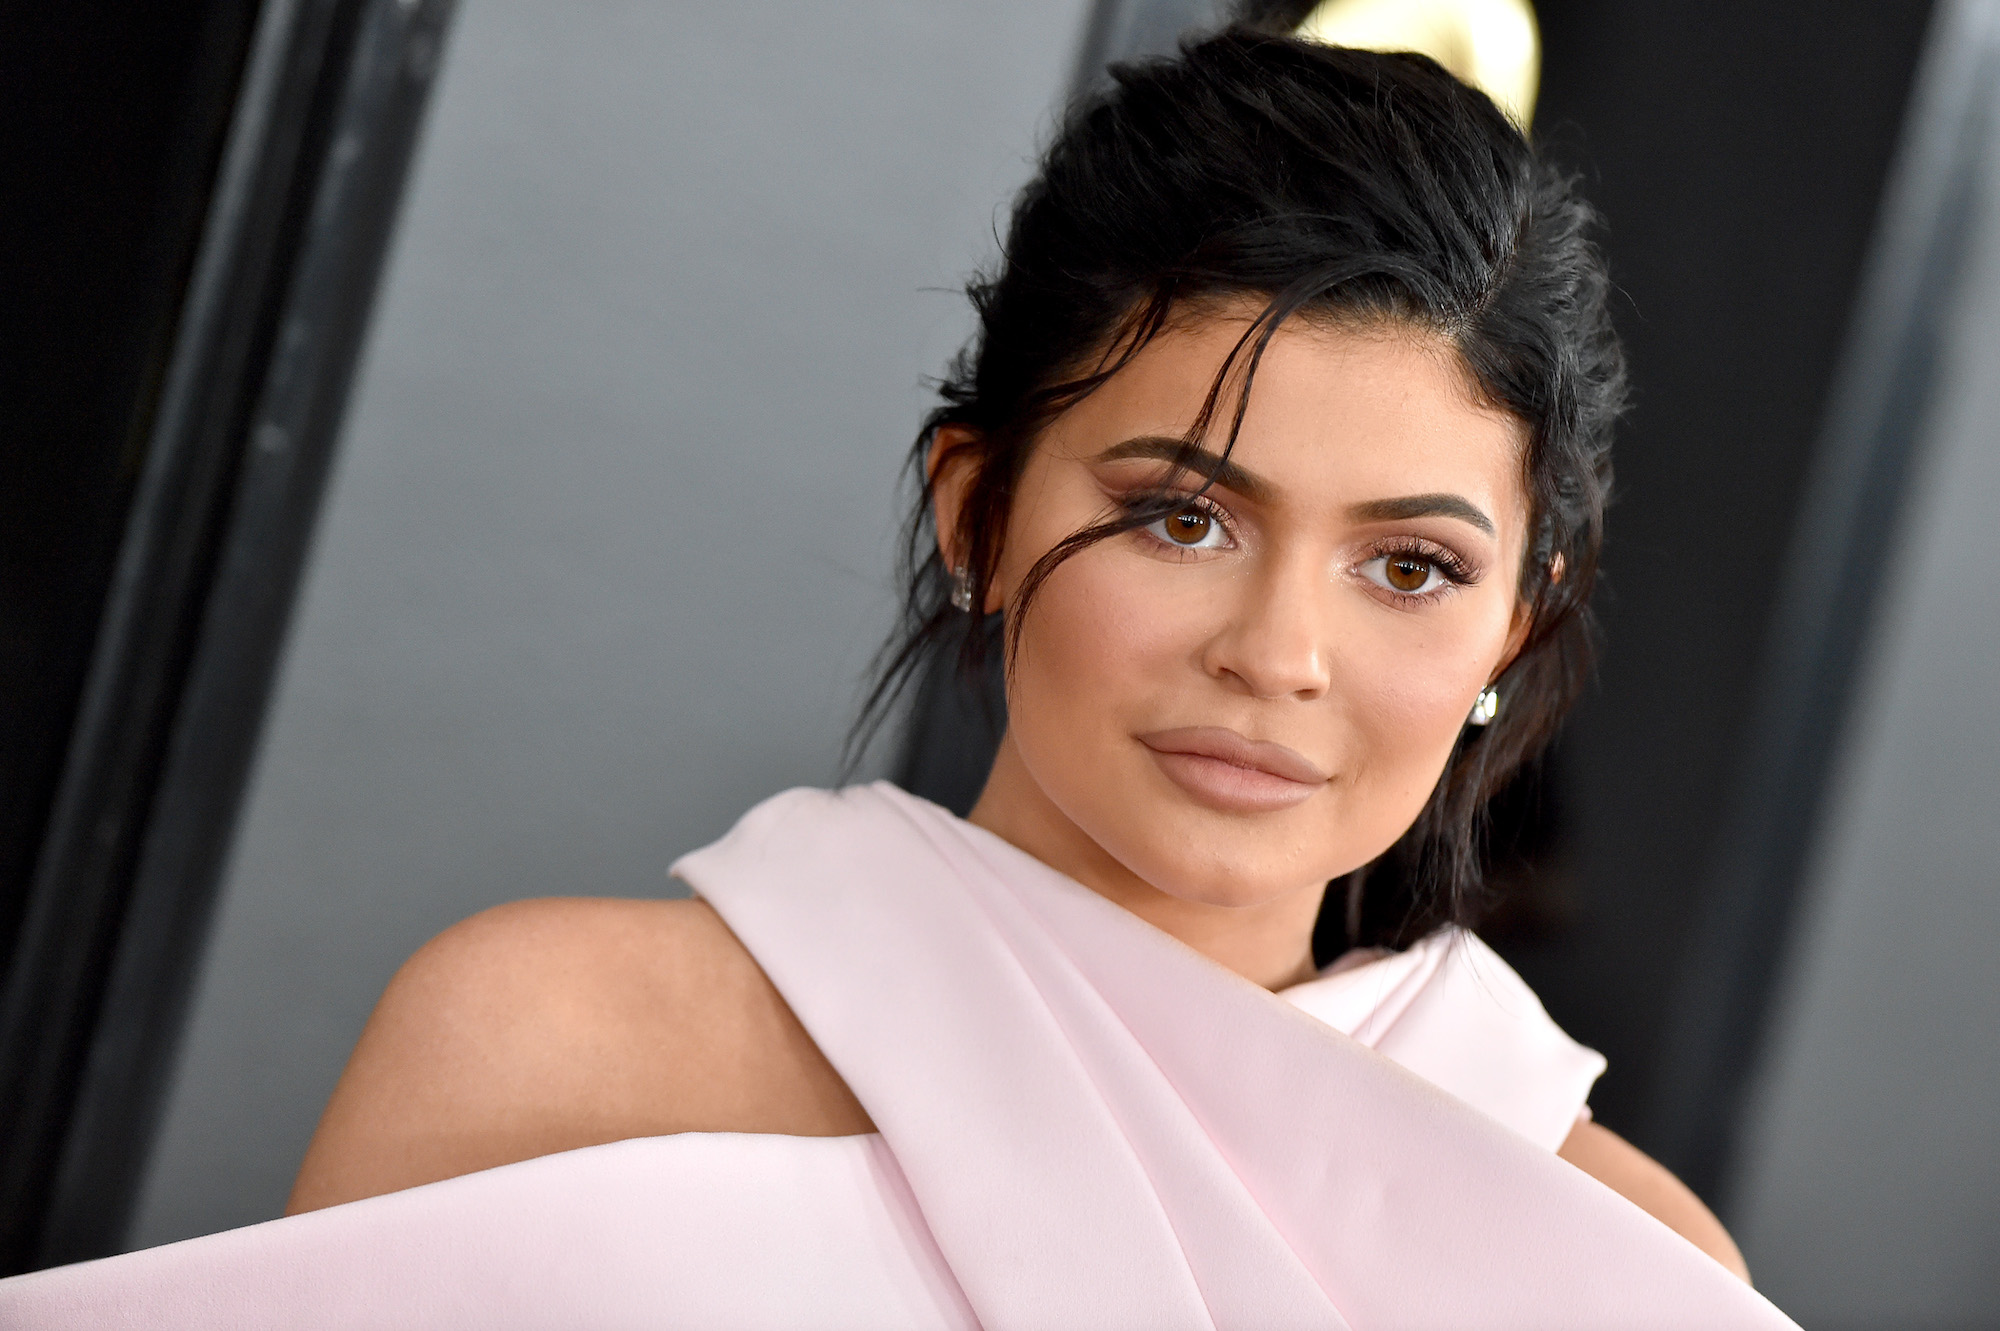 Photo Of Kylie Jenner And Daughter Stormi Looks Sad Some Fans Complain